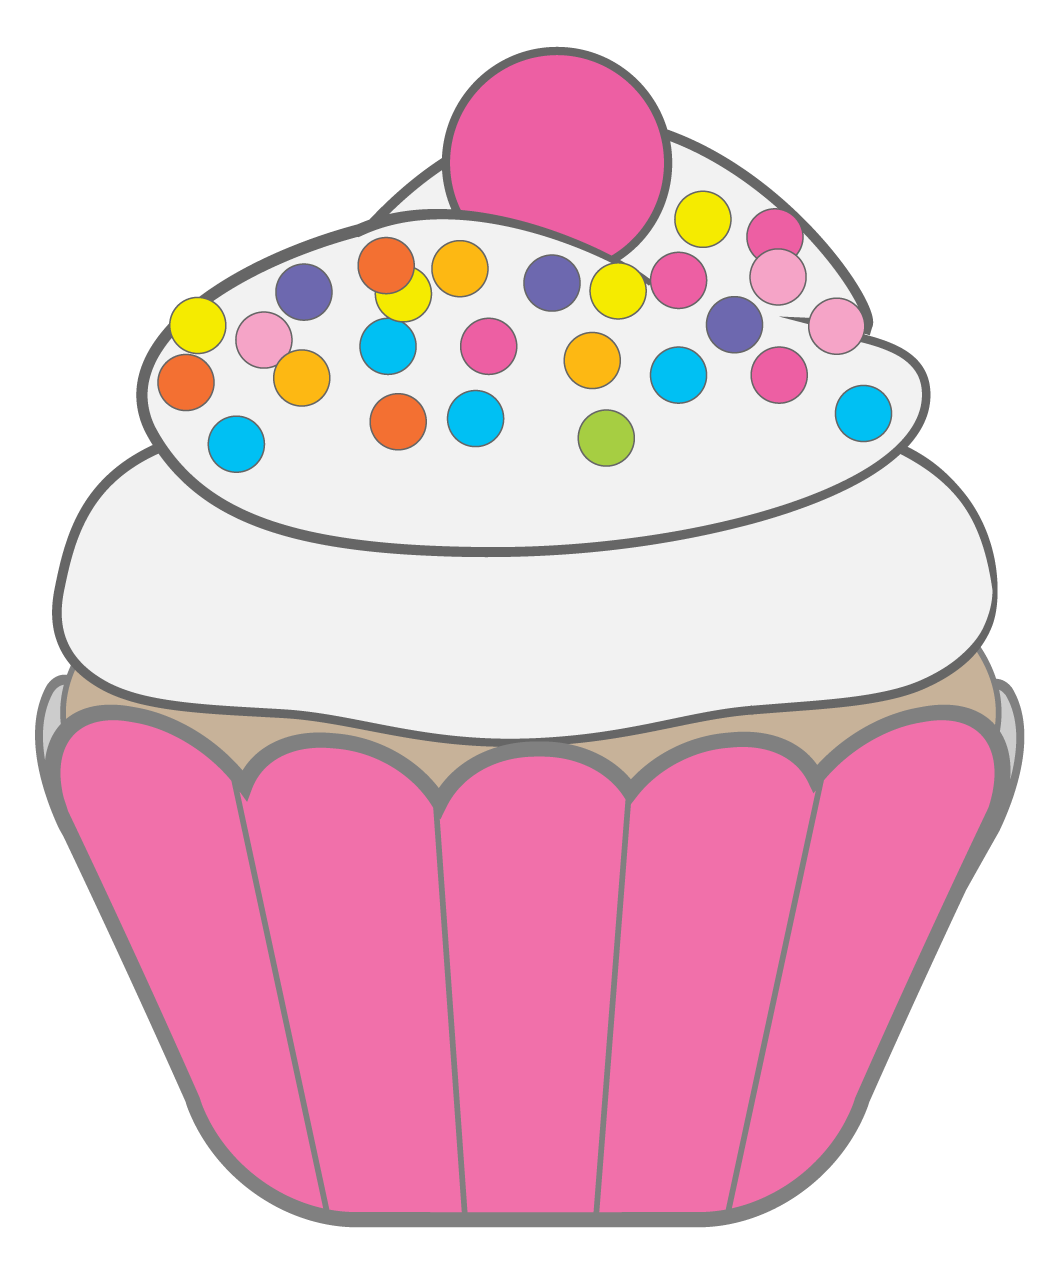 Fraction clipart cake. Cupcakes muffins by carol